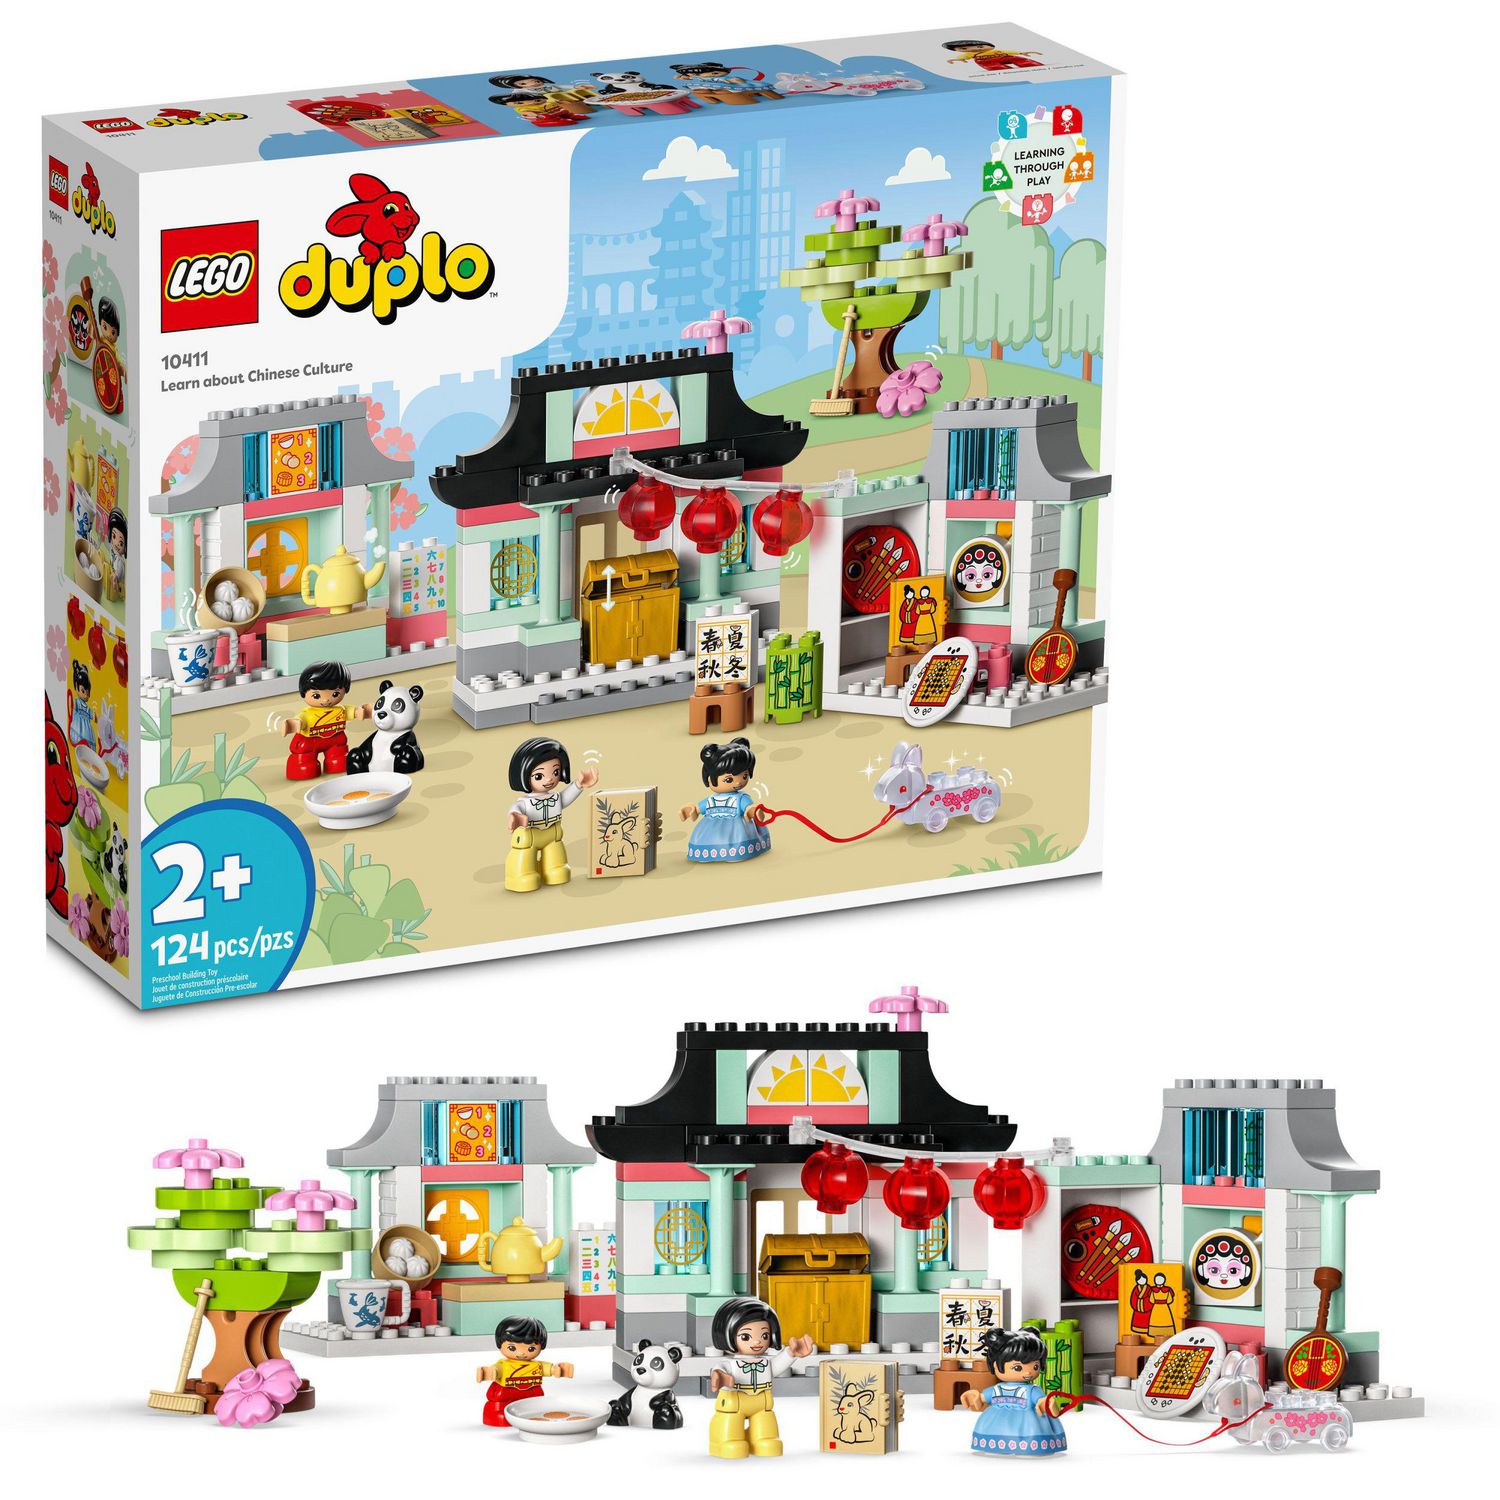 LEGO DUPLO Learn About Chinese Culture 10411 Bricks Set with Toy